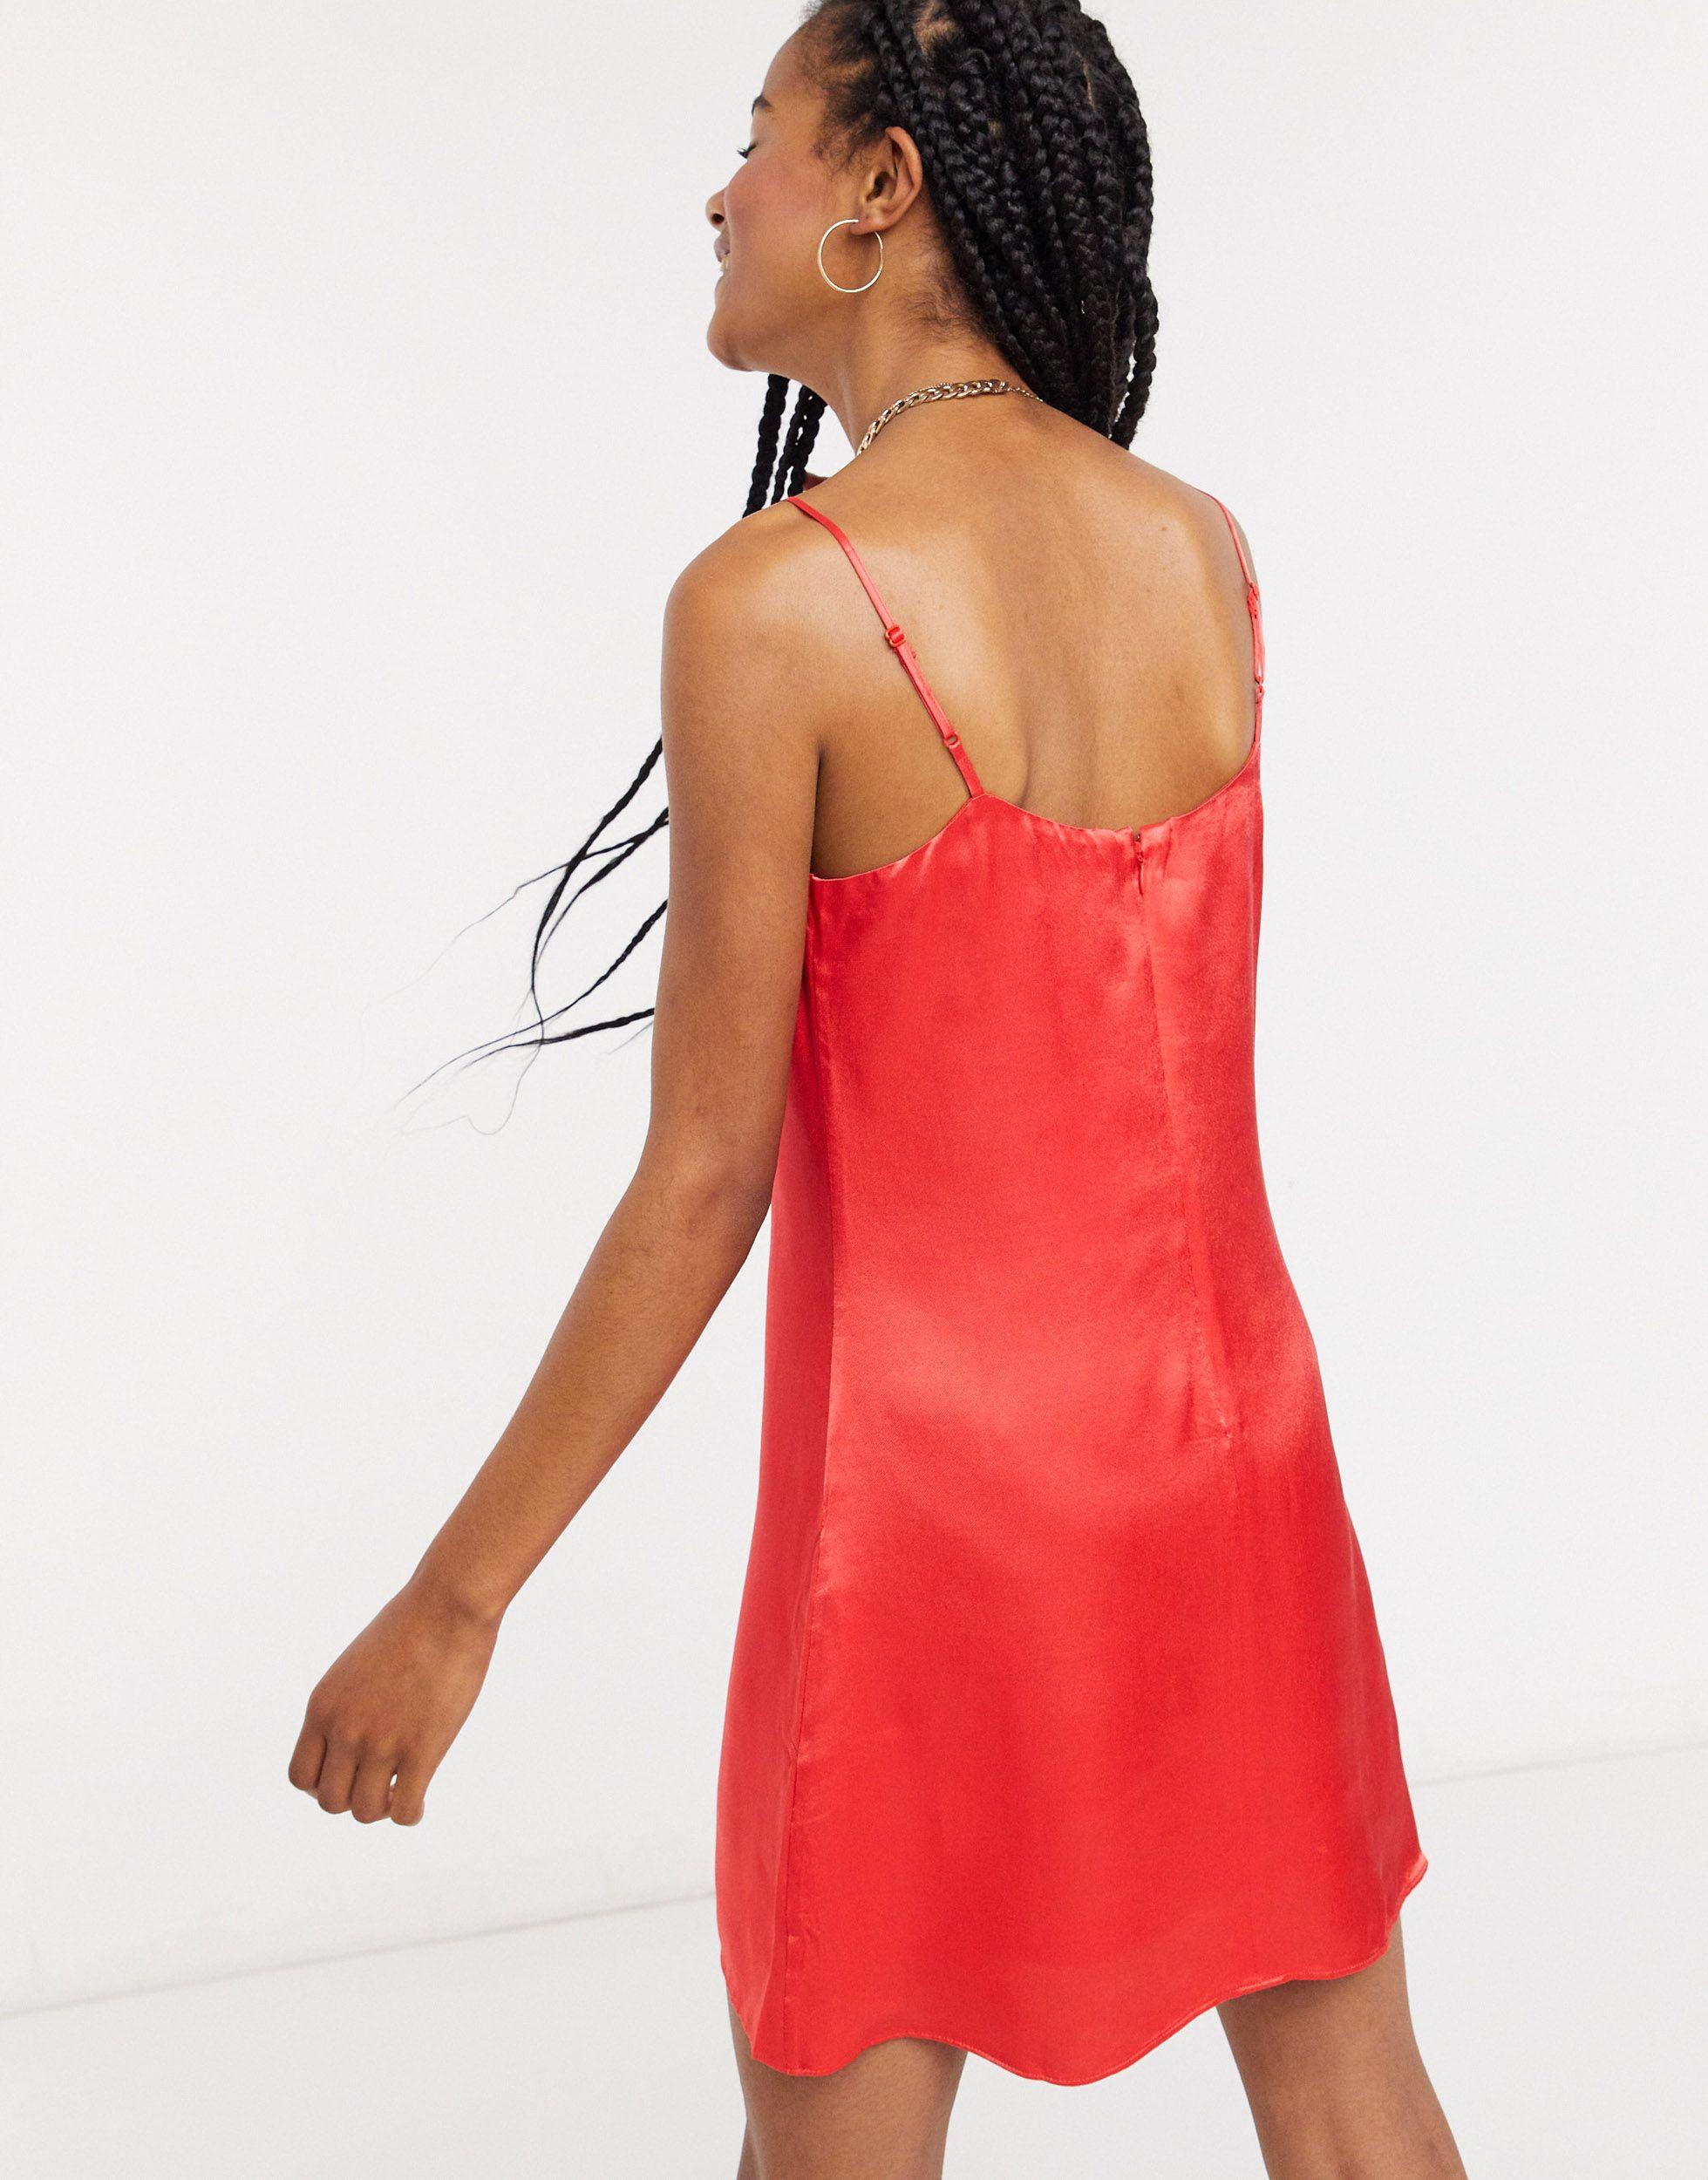 & Other Stories Satin Mini Slip Dress in Red | Lyst